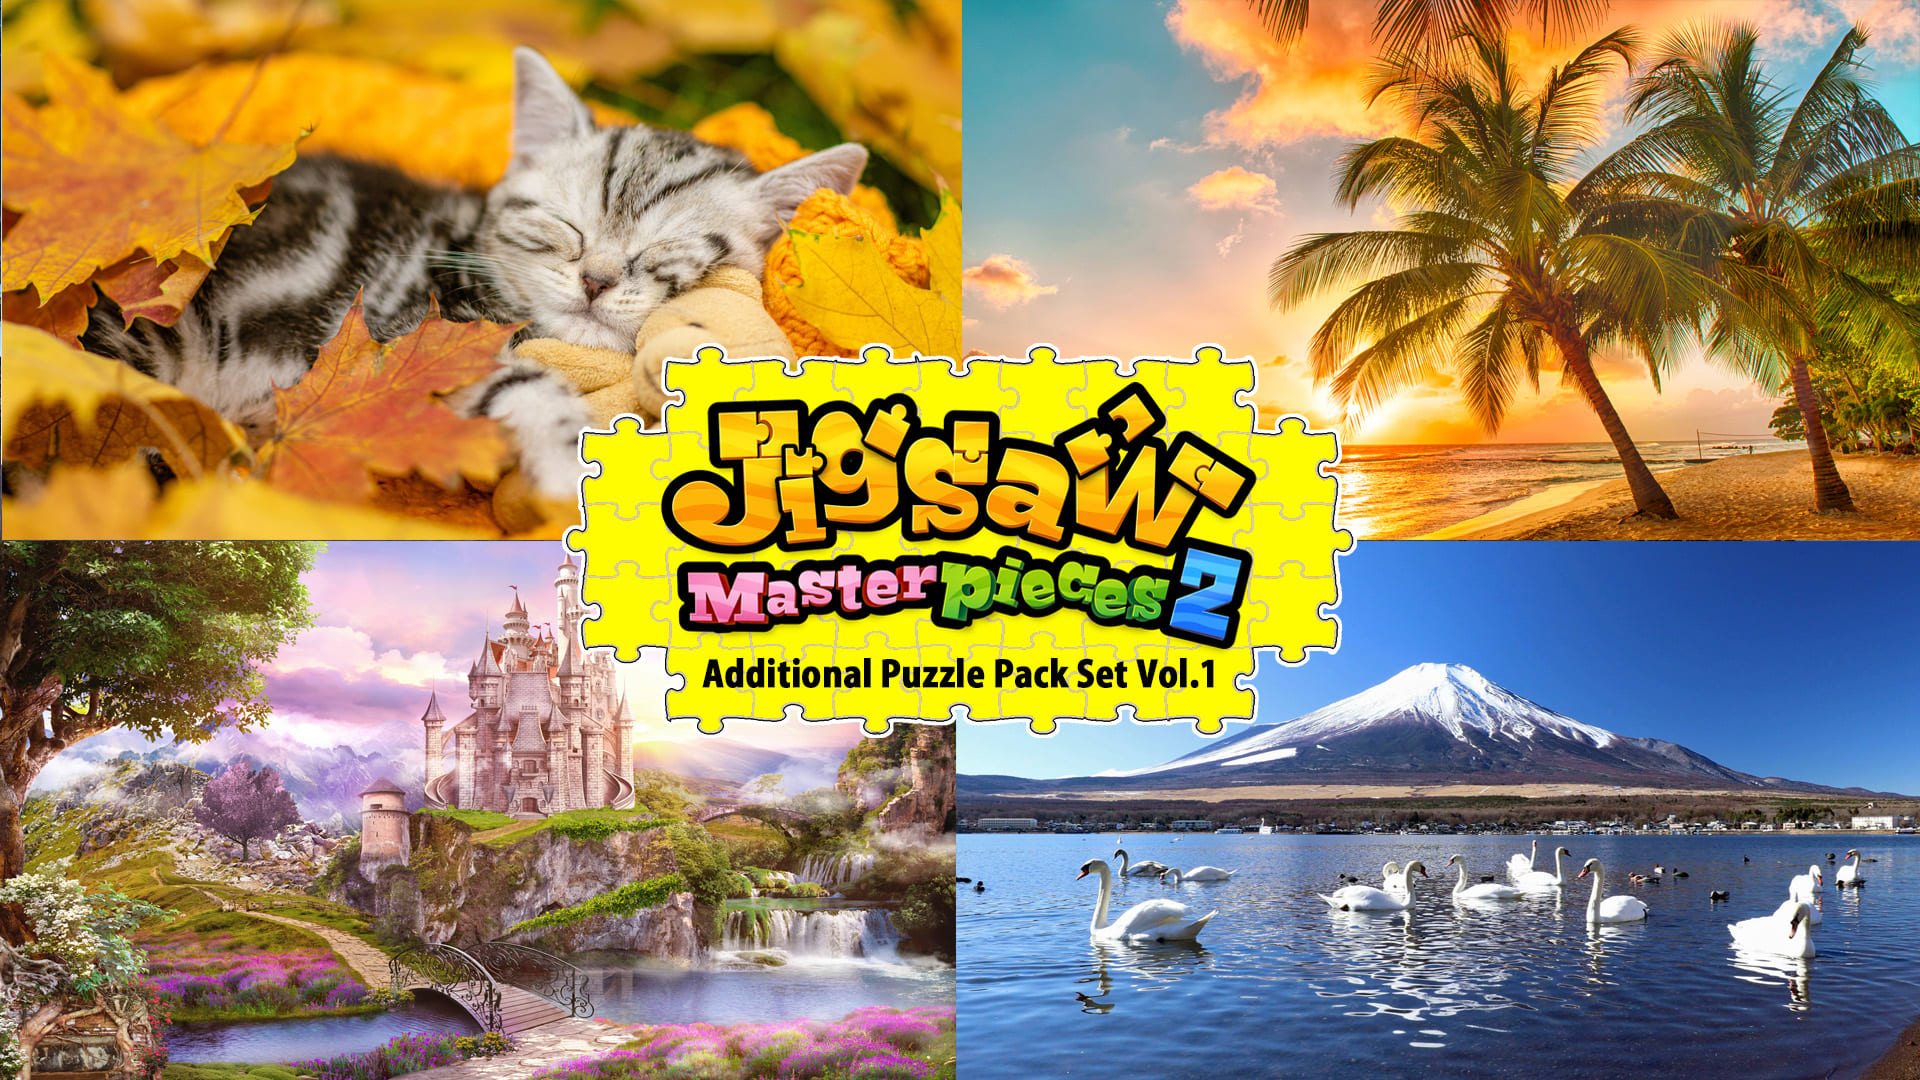 Additional Puzzle Pack Set Vol.1